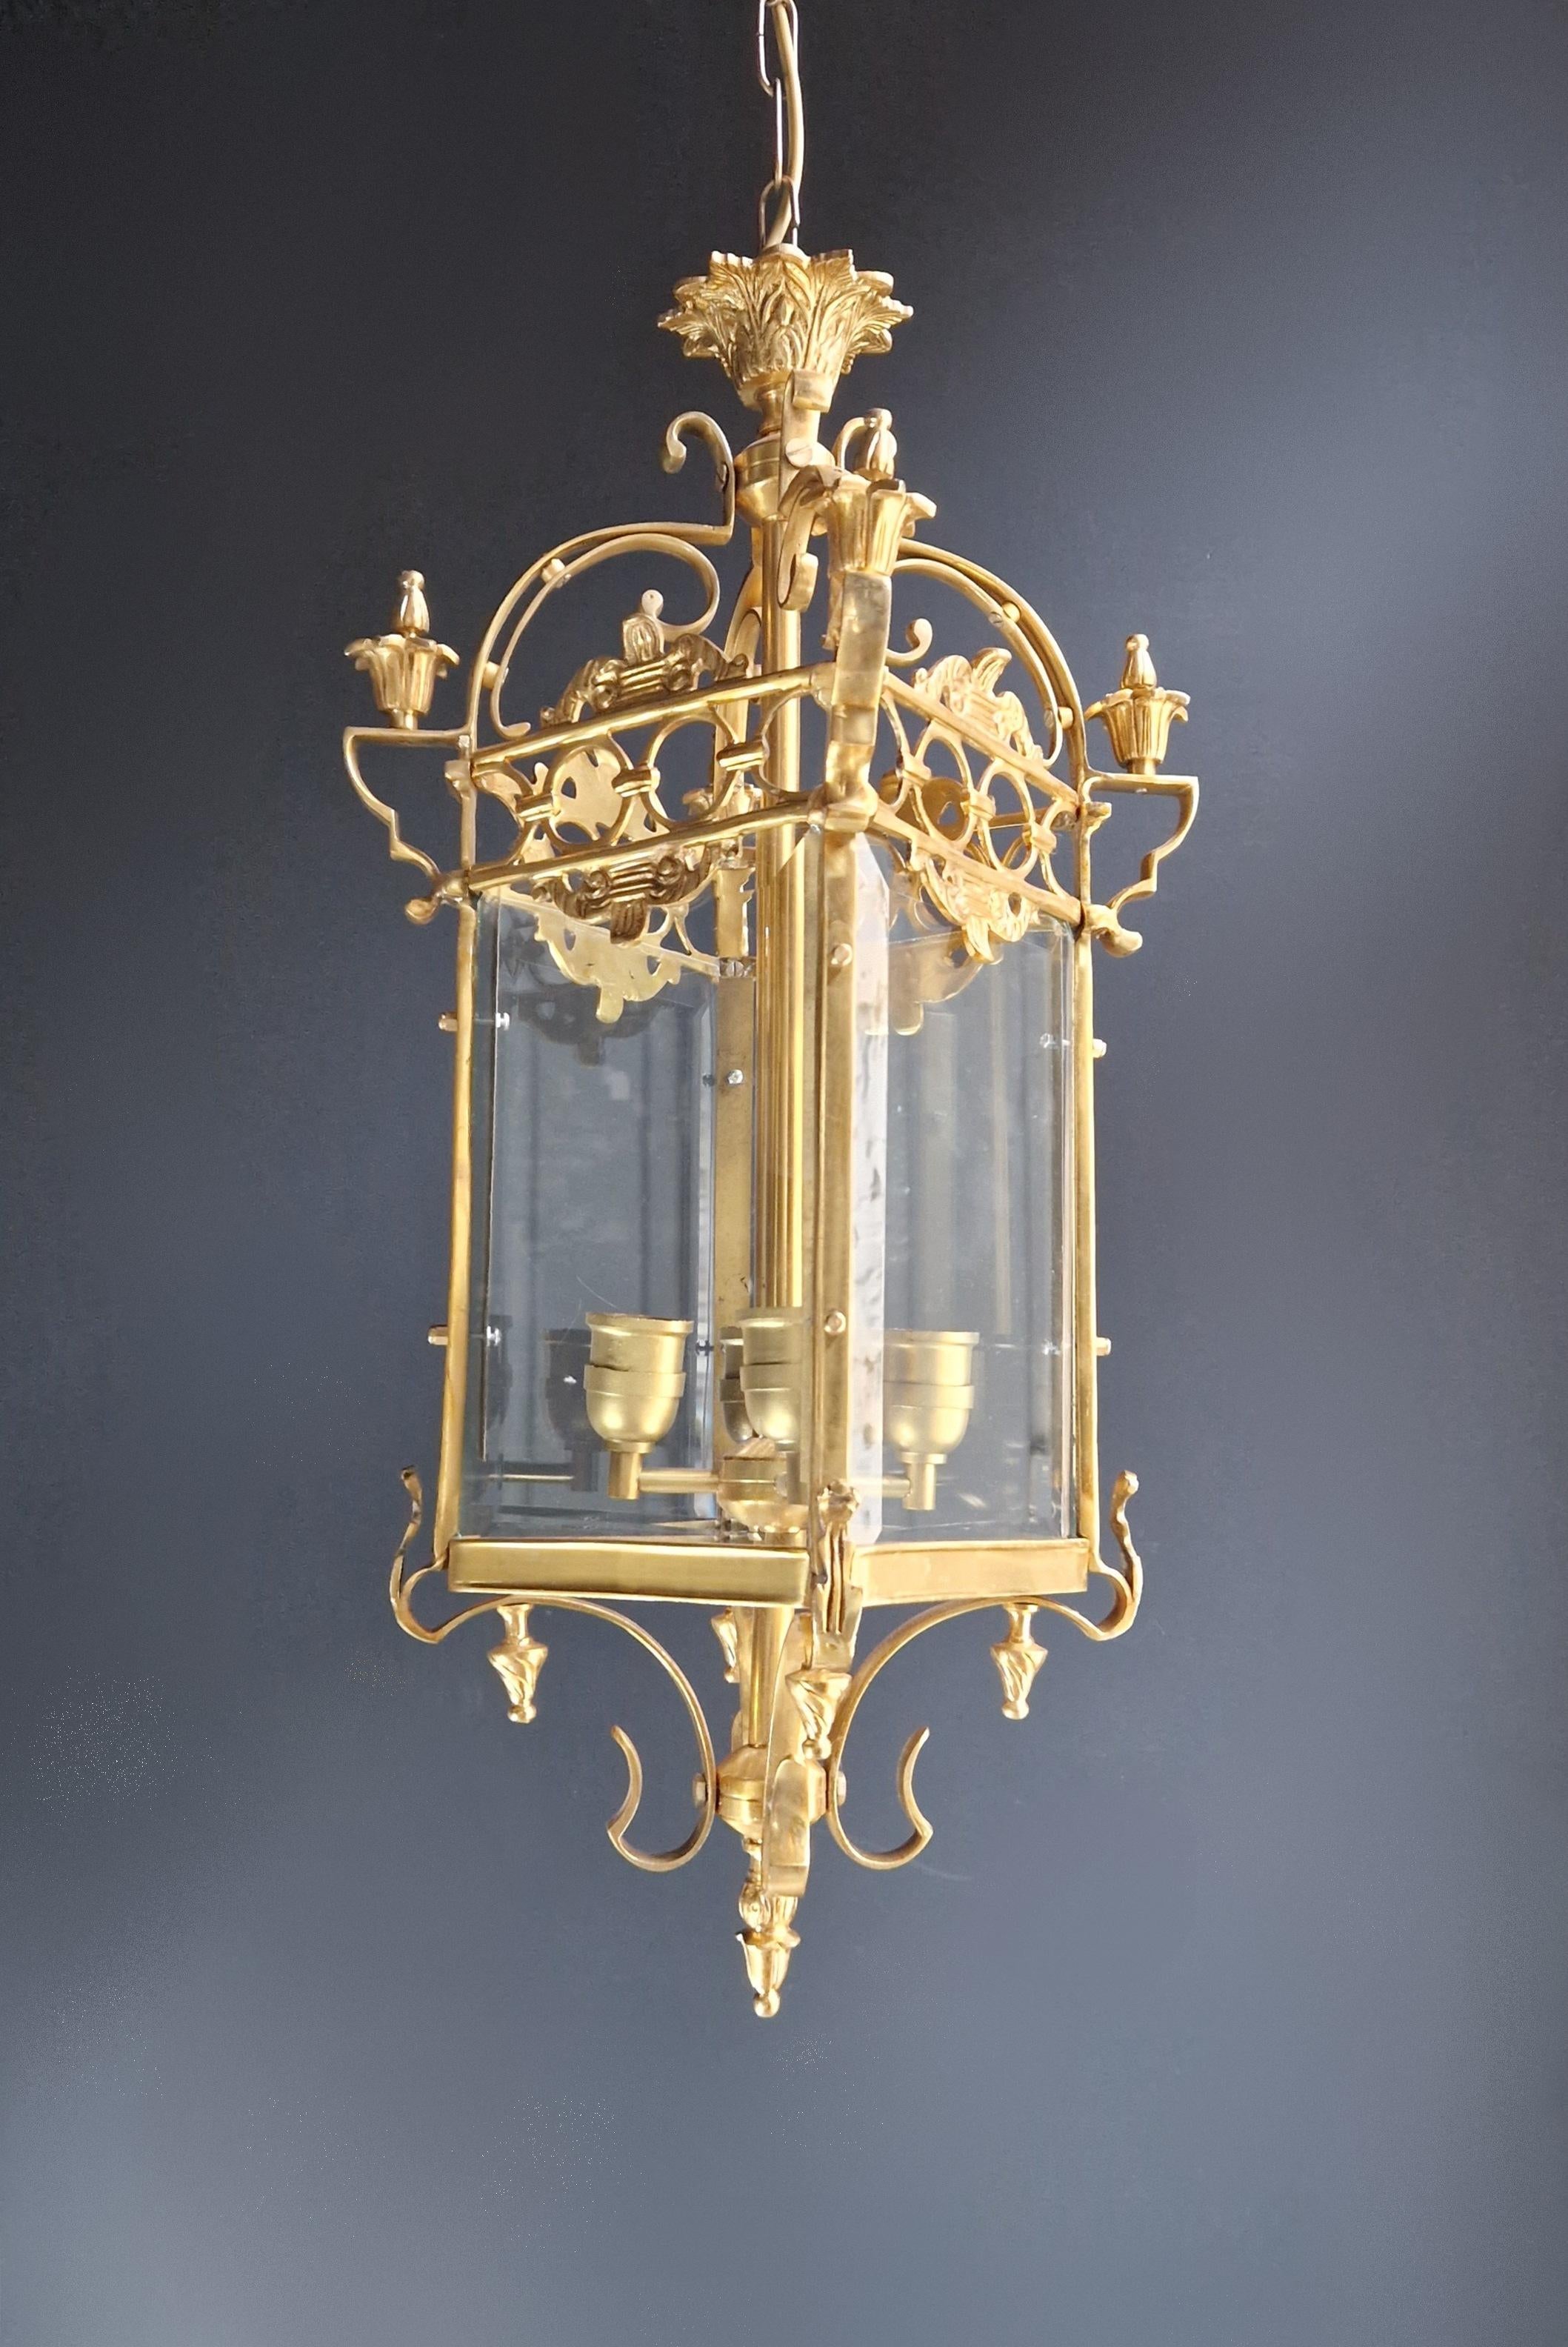 More available large cylindrical lantern brass glass pendant lighting

Measures: height without chain 70 cm, diagonal 35 cm. Weight (approximately): 6kg.

Number of lights: 4-light bulb sockets: E14
Material: Glass, brass

Wiring fit to